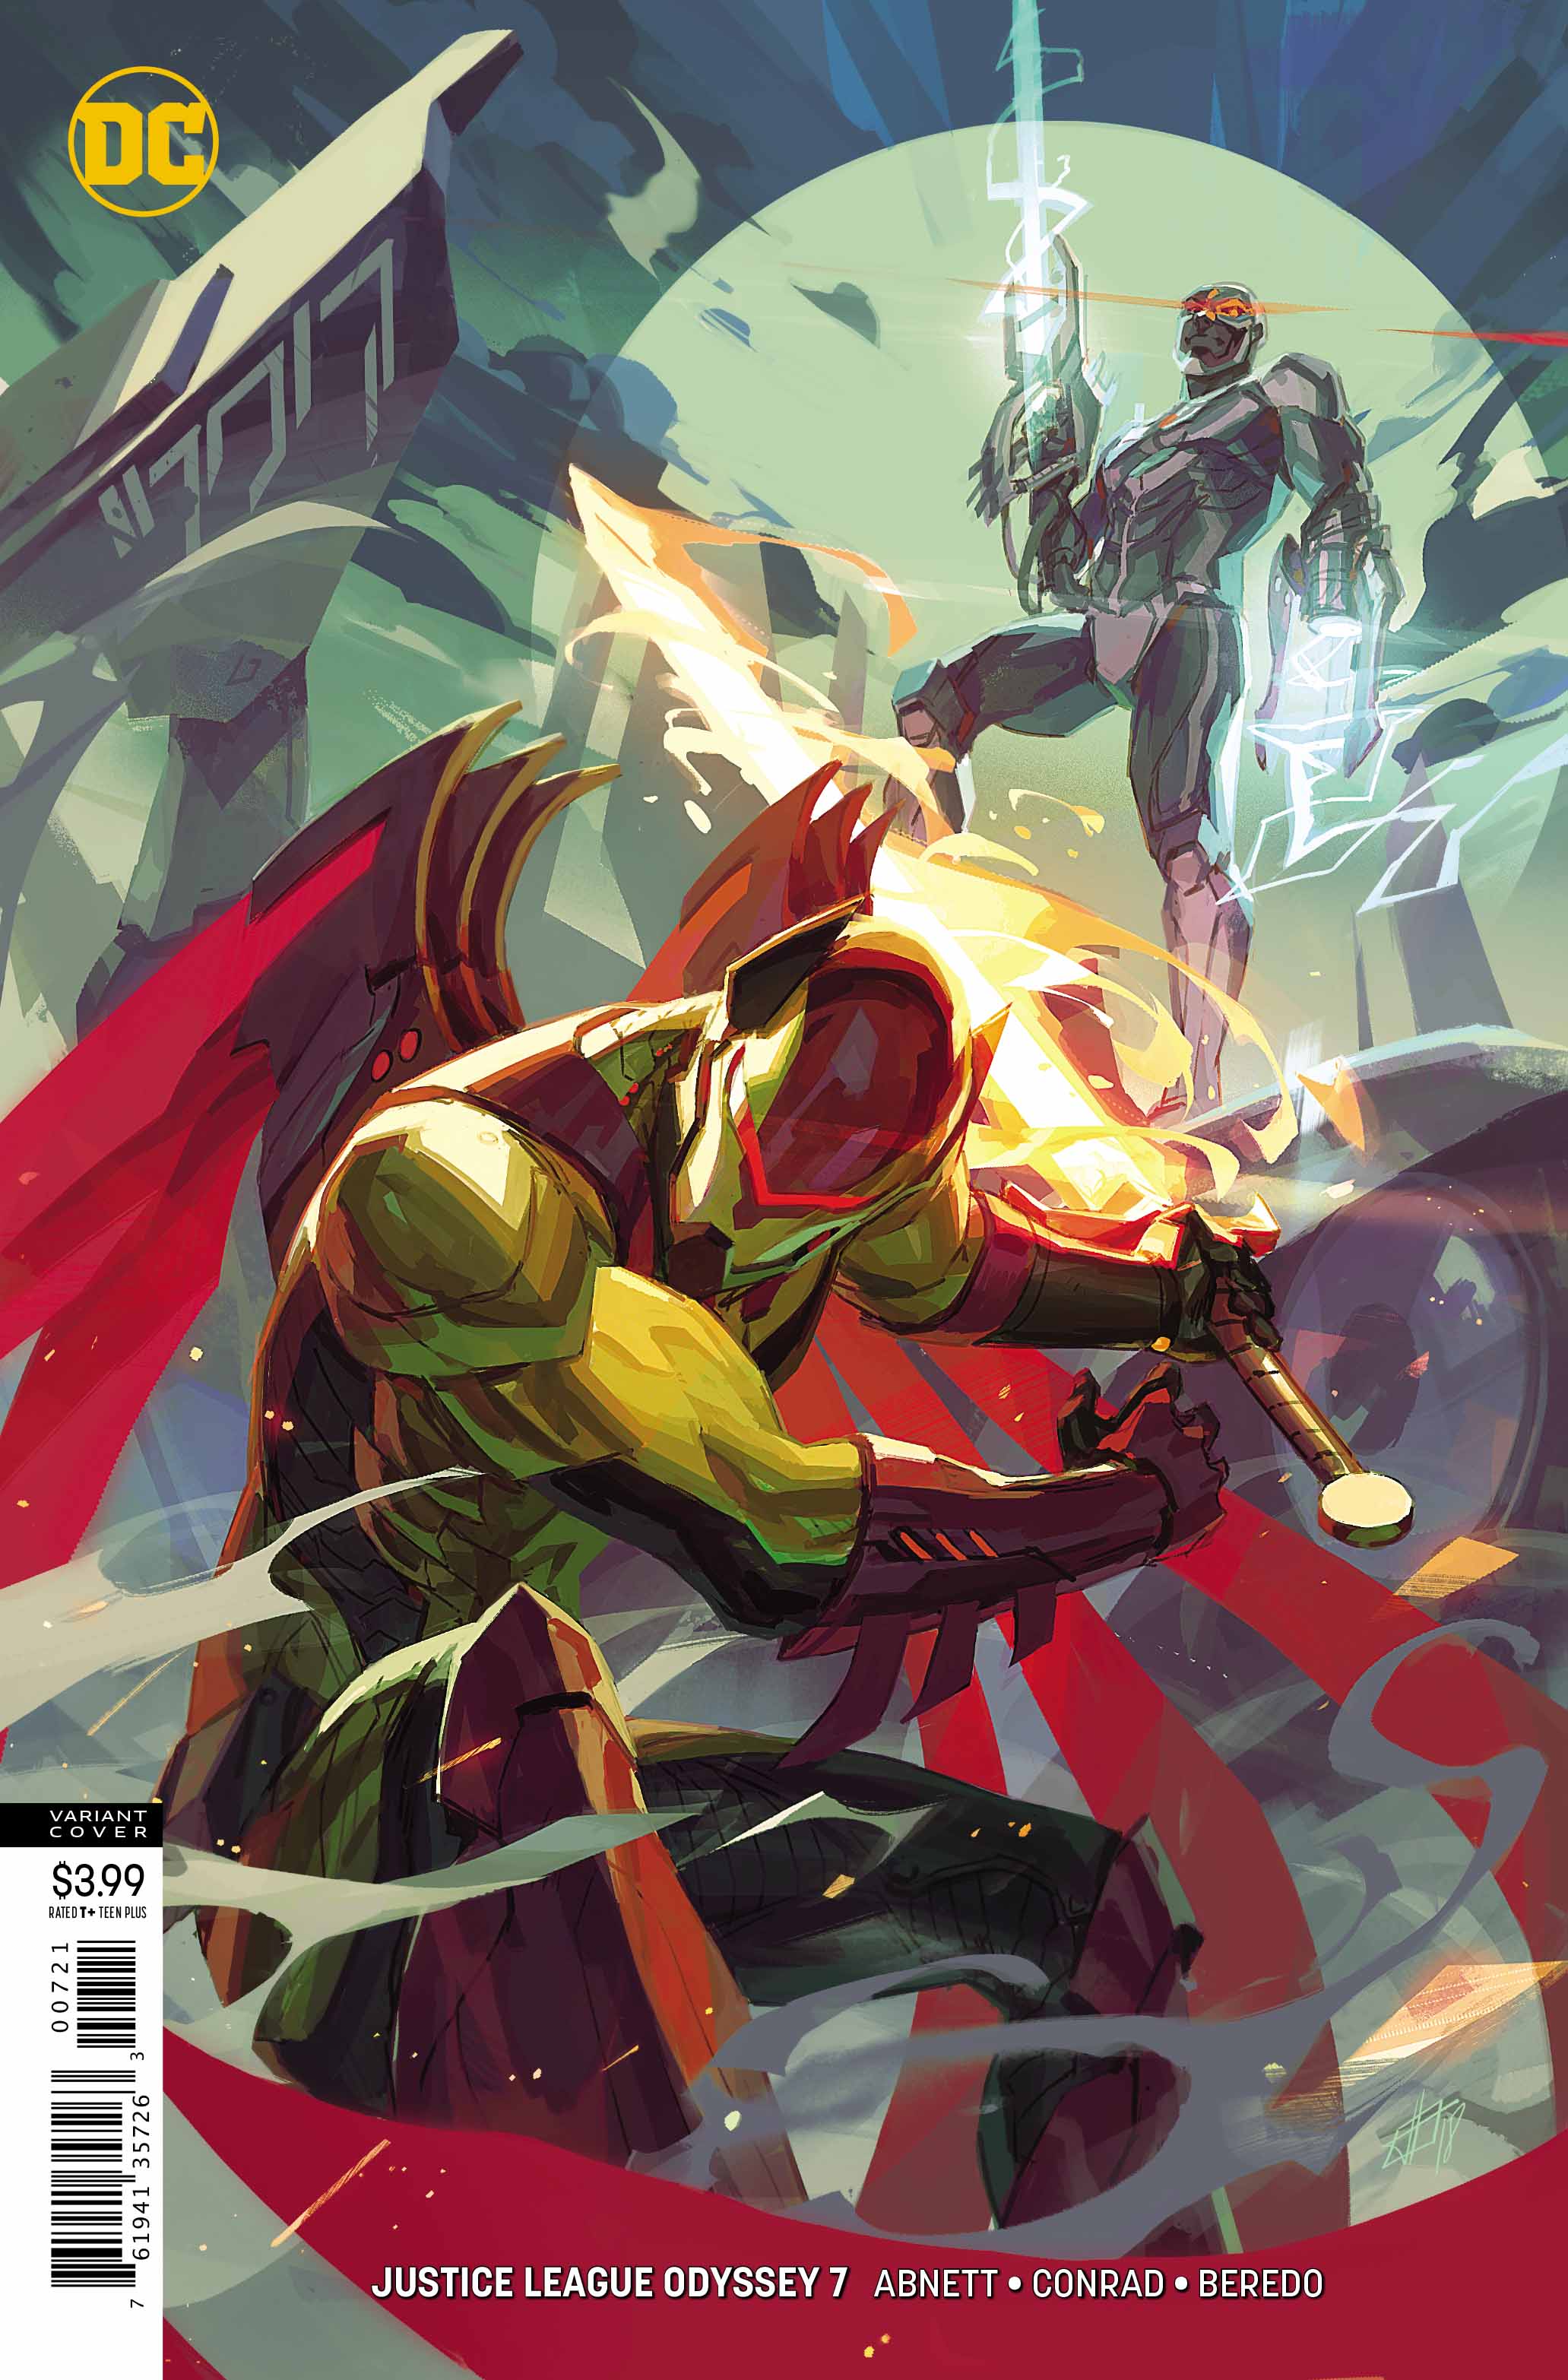 Justice League Odyssey #7 Review